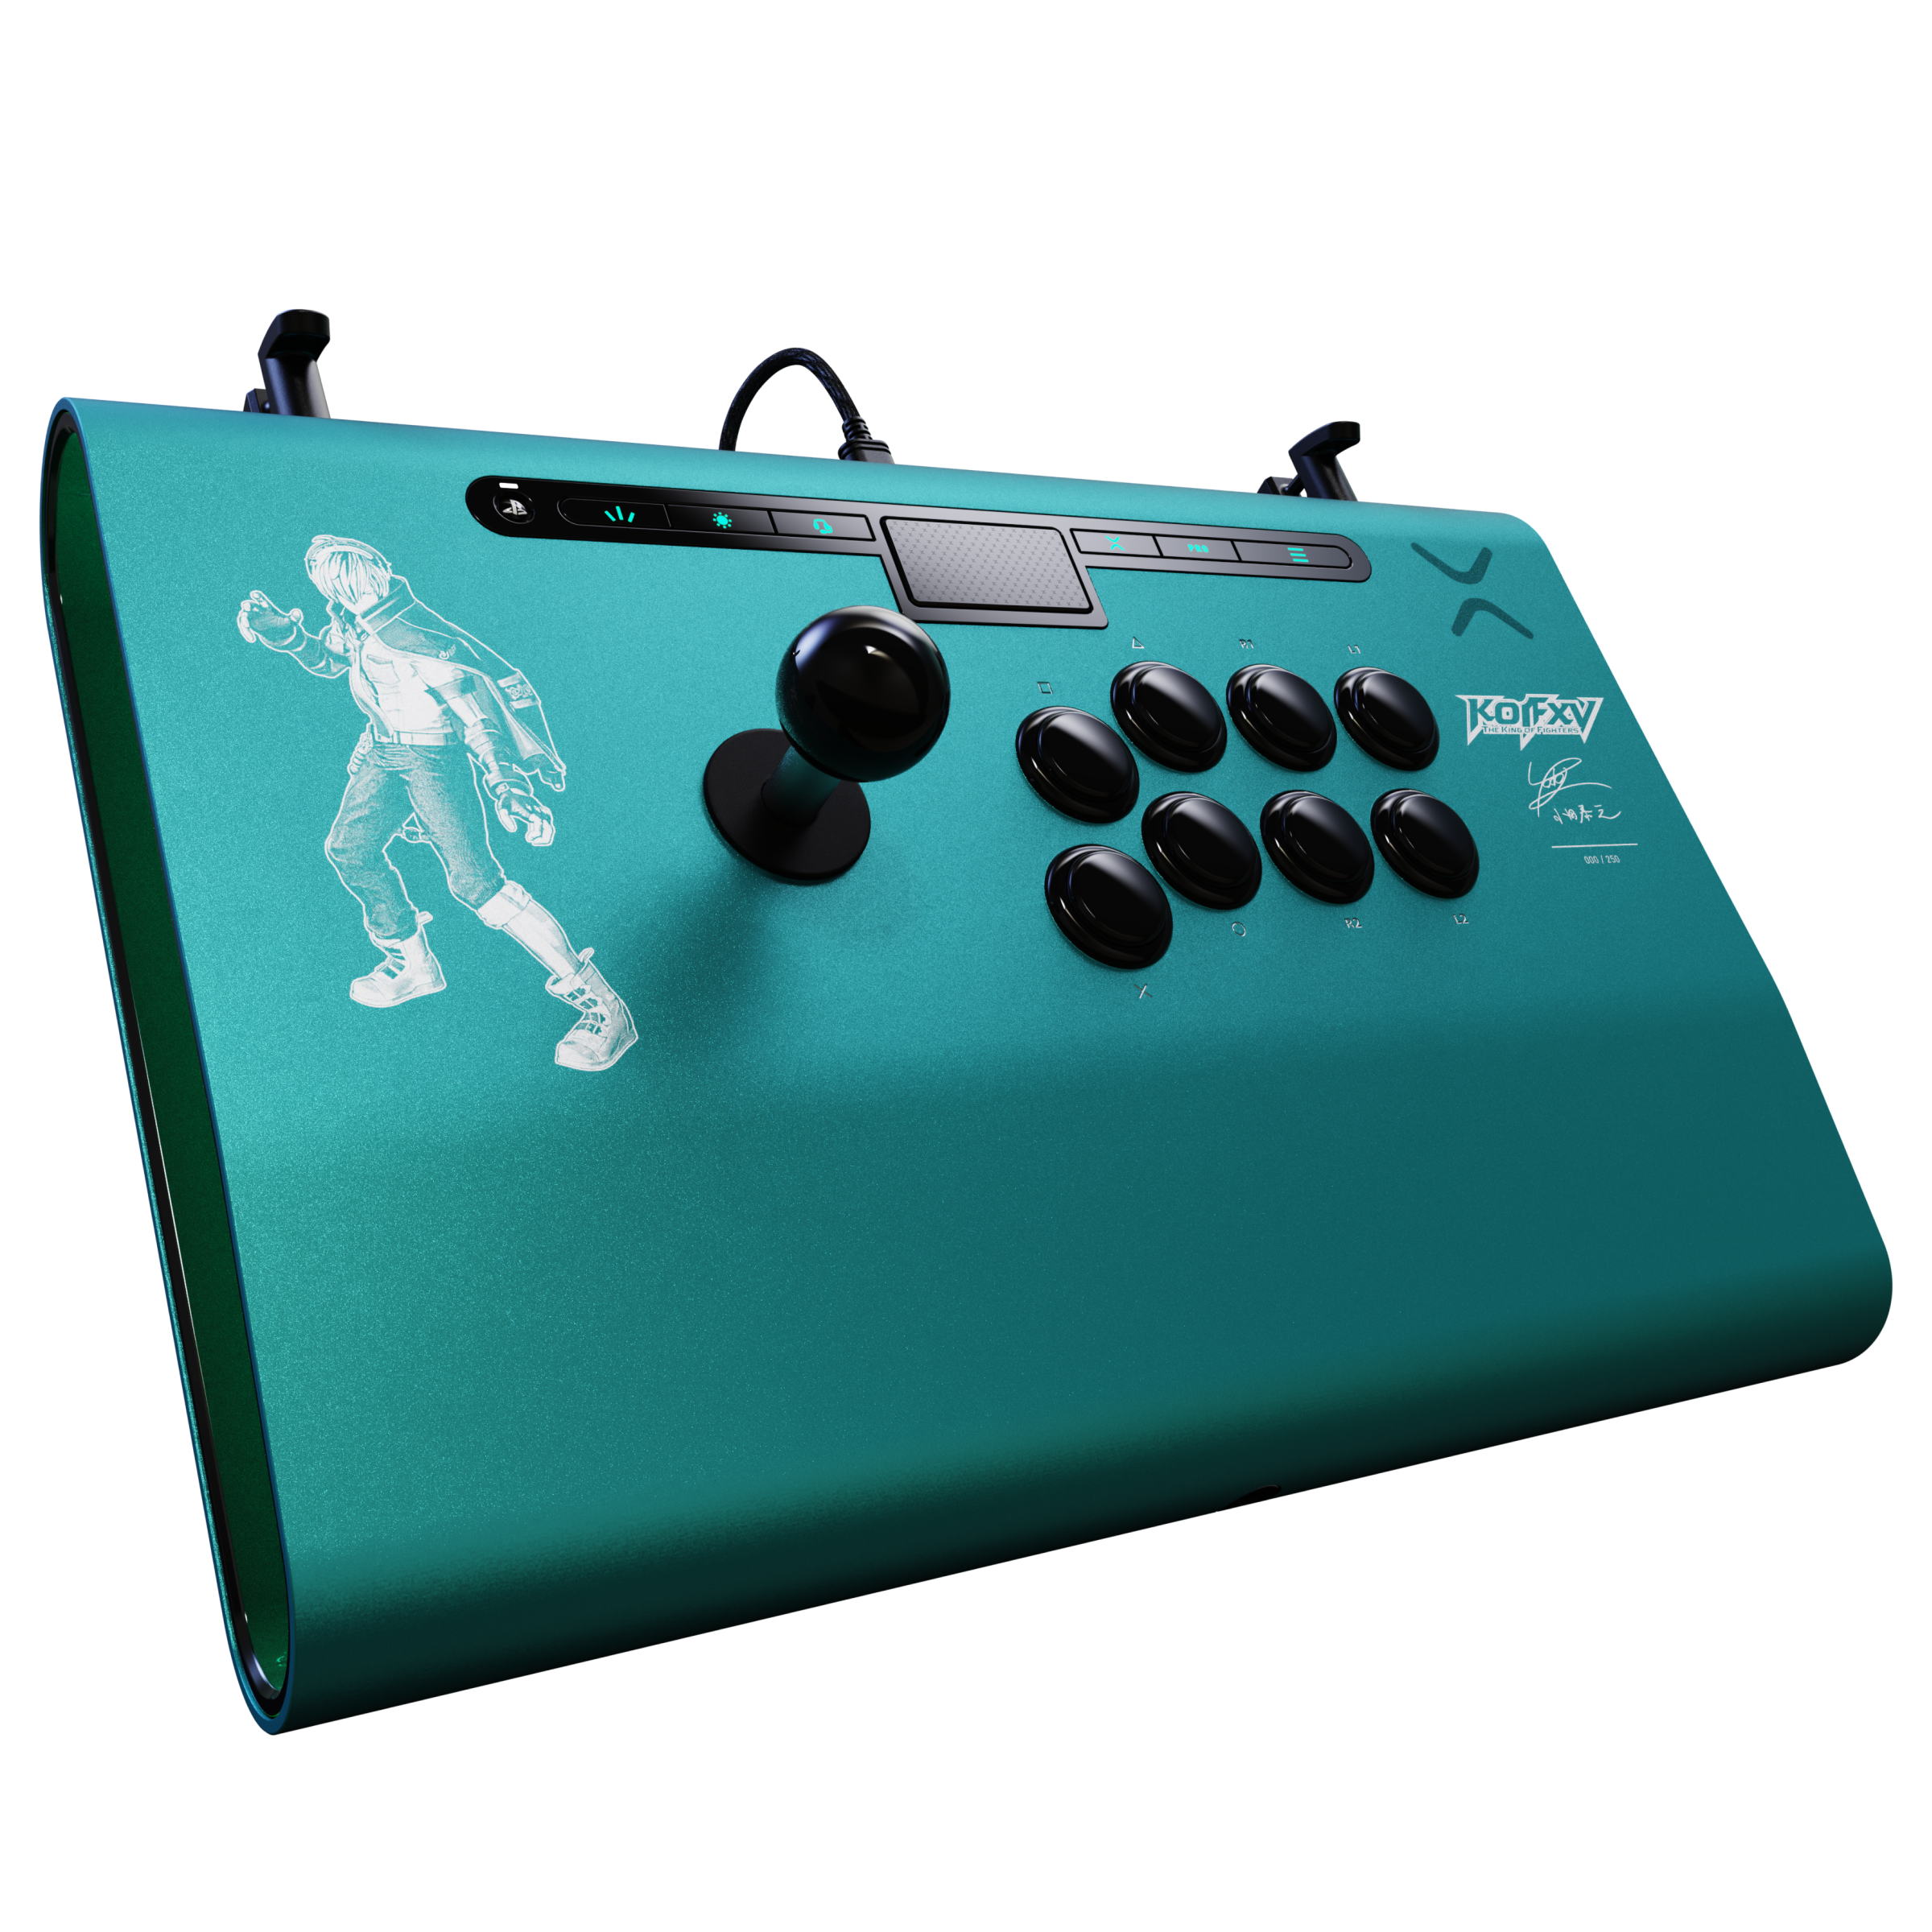 PS5, PS4 & PC The King of Fighters Victrix Pro FS Arcade Fight Stick:  Shun'ei